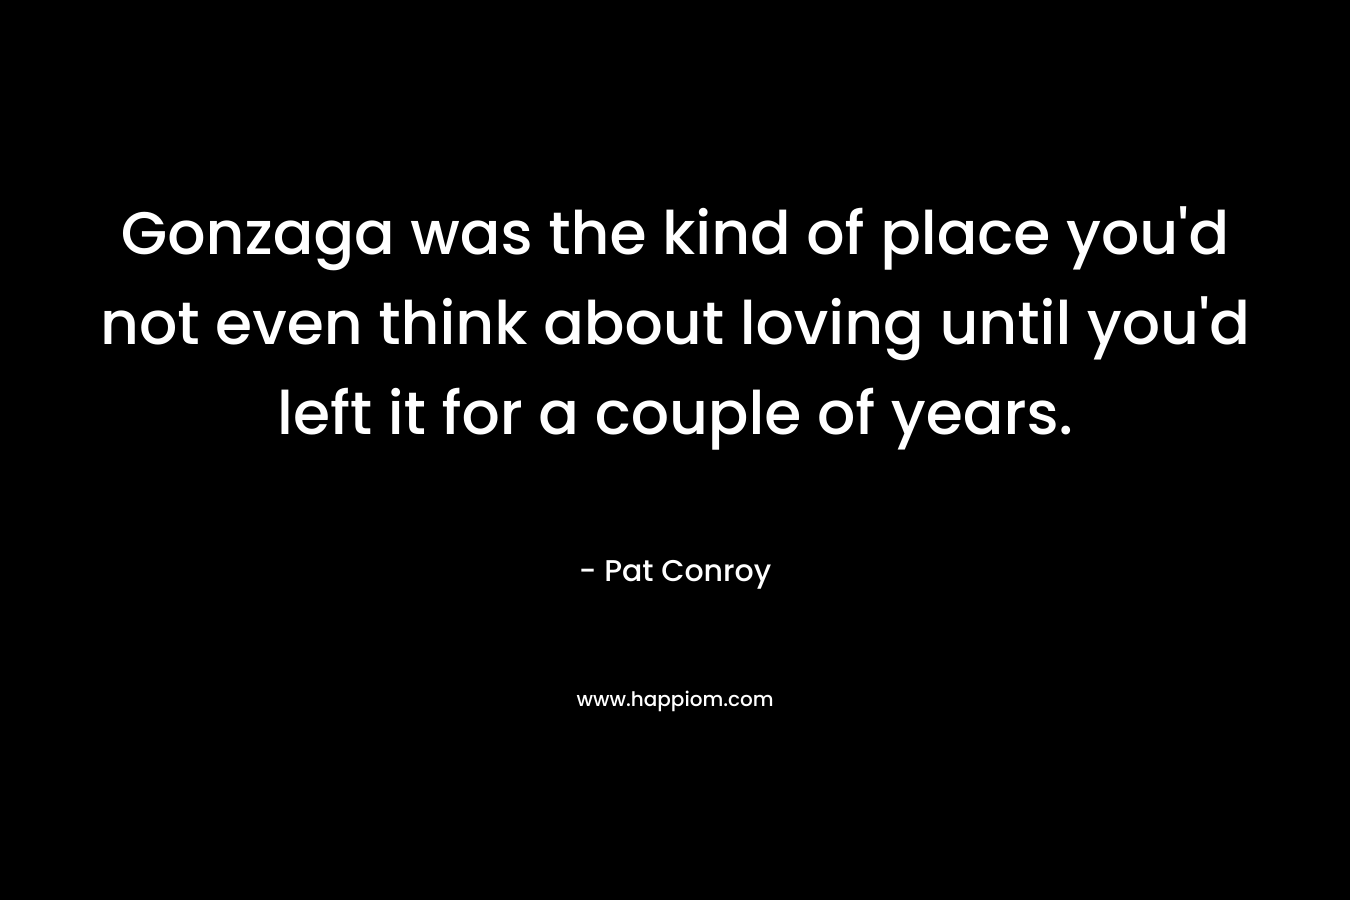 Gonzaga was the kind of place you’d not even think about loving until you’d left it for a couple of years. – Pat Conroy